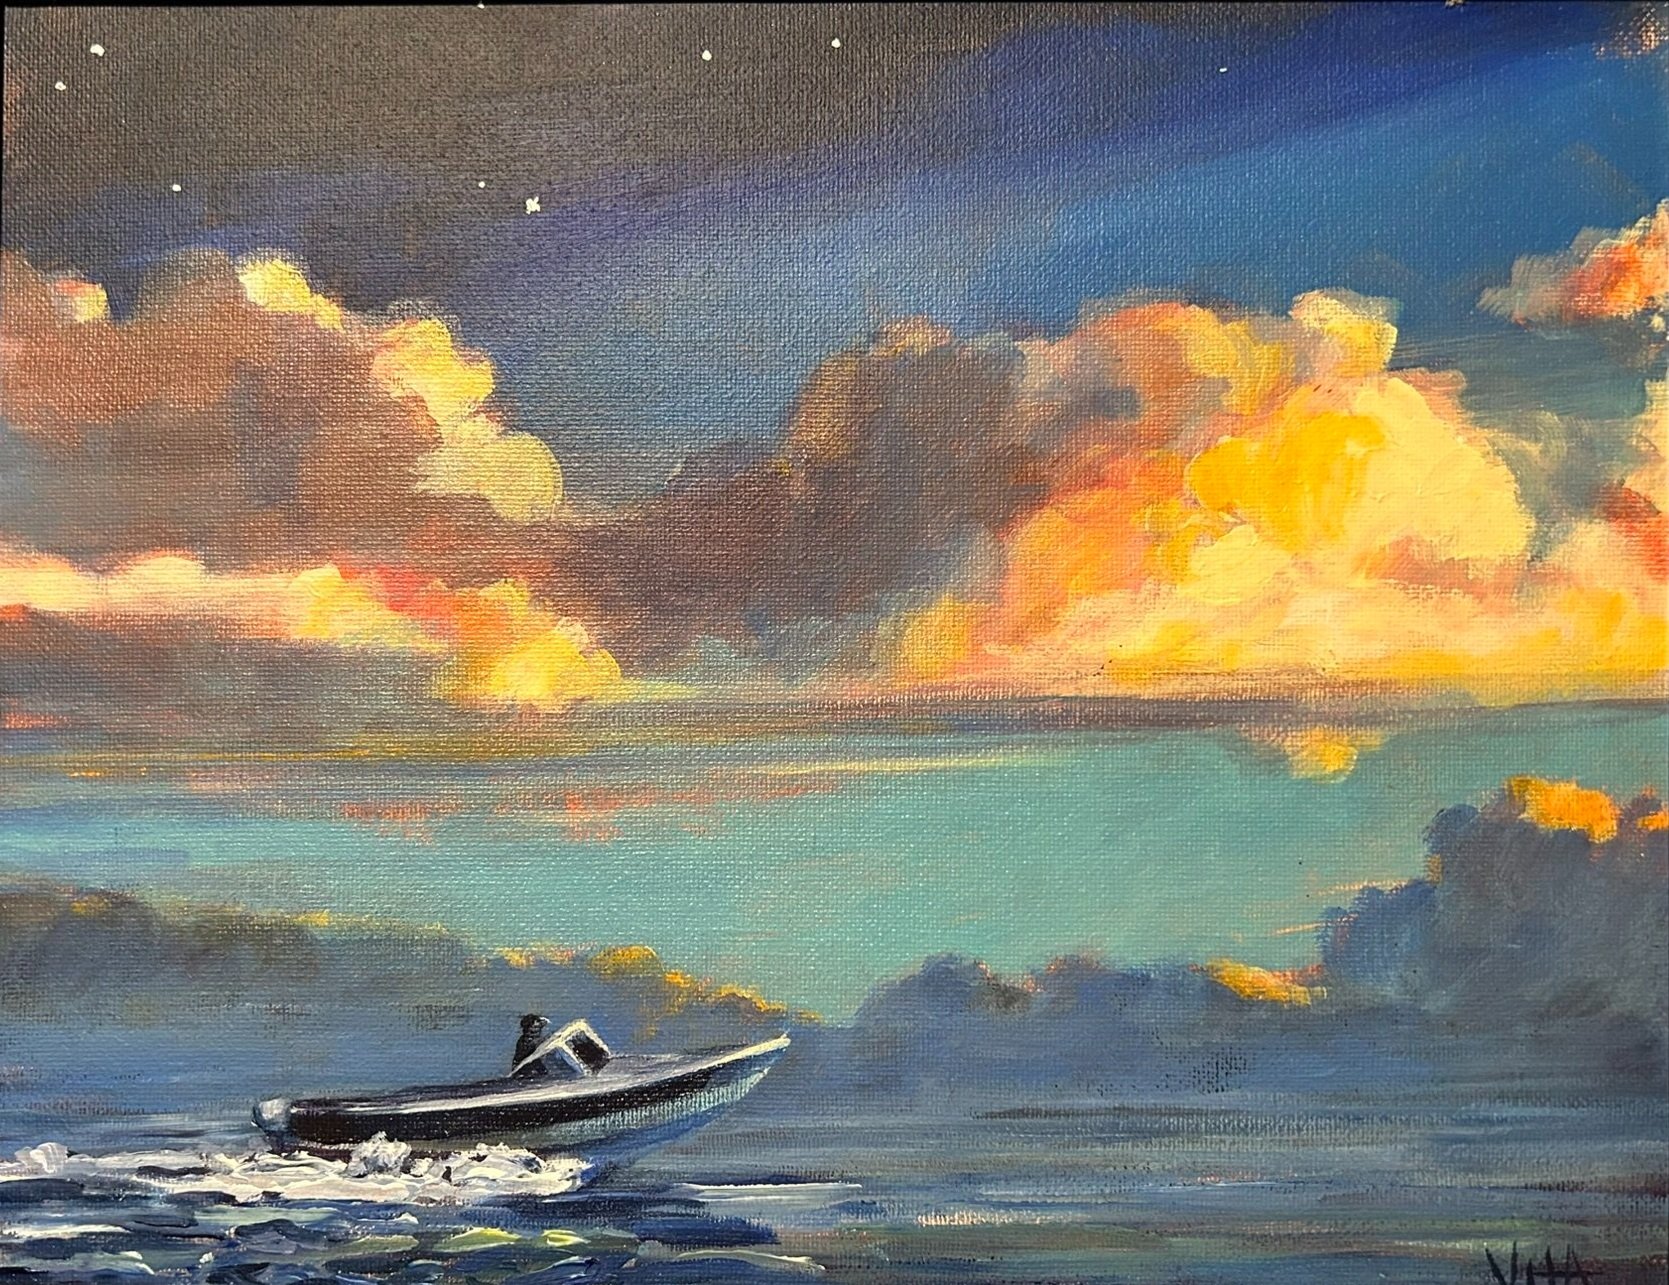 SOLD, Time to Head Home! Boat in Beaufort, Acrylic on Canvas, Copyright 2020 Hirschten